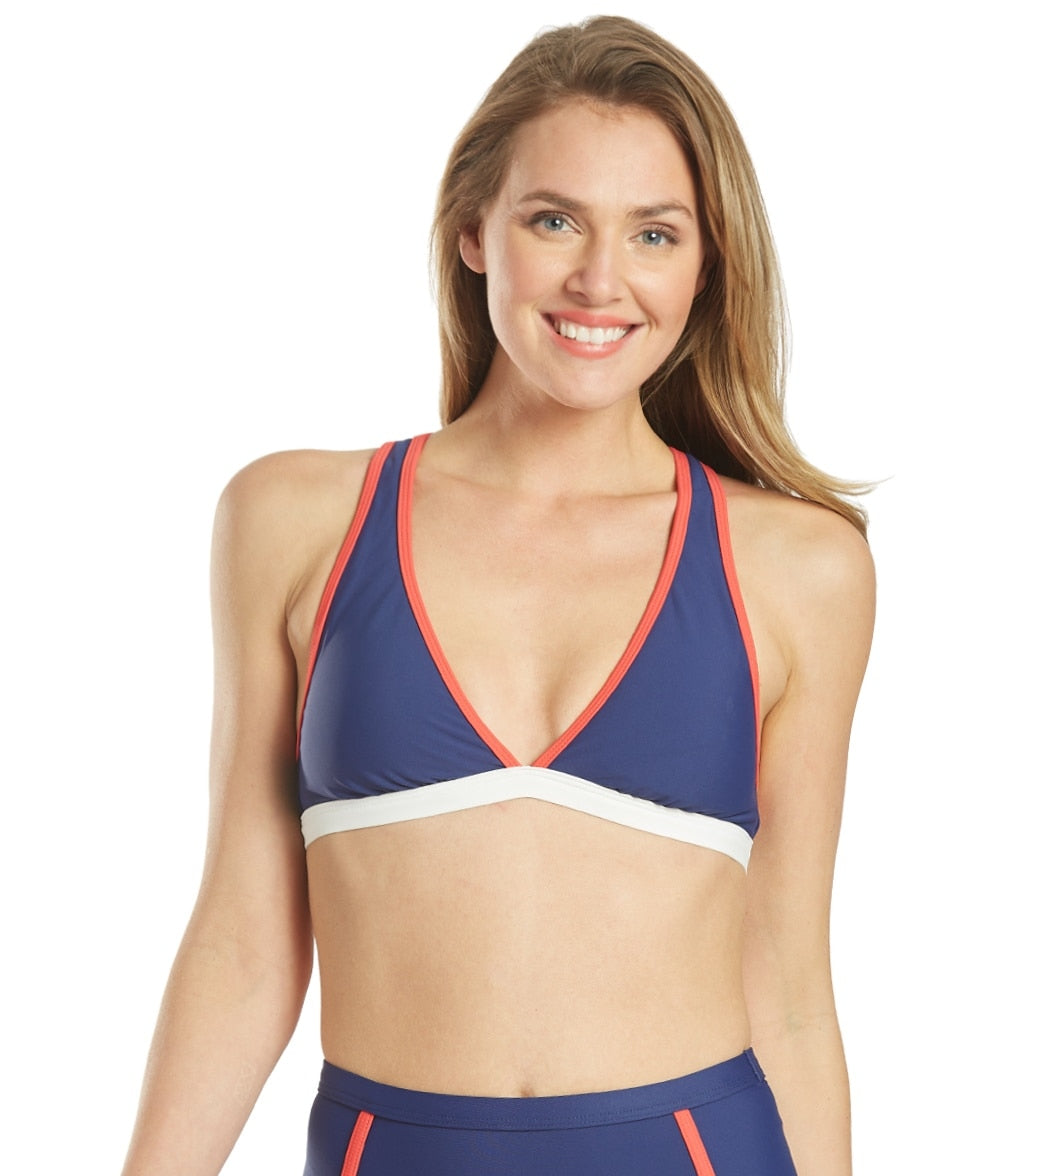 Next Coral Reef Paddle Out Bikini Top - Navy Medium - Swimoutlet.com